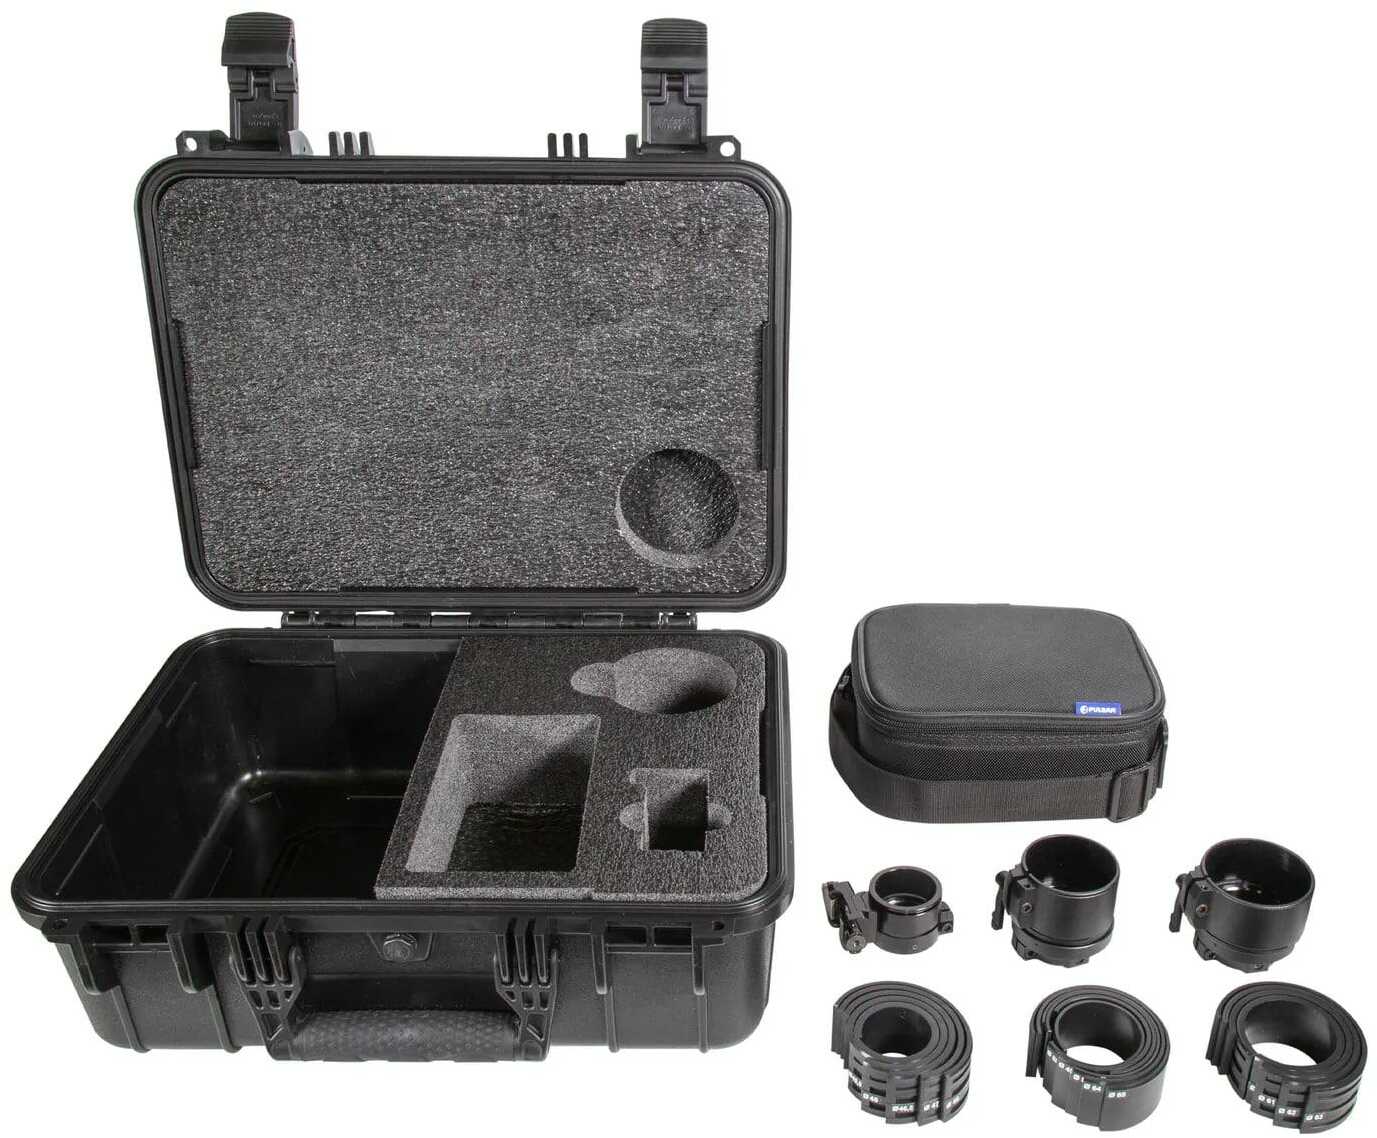 Pulsar Proton Fxq30 Kit Thermal Imaging Front Attachment